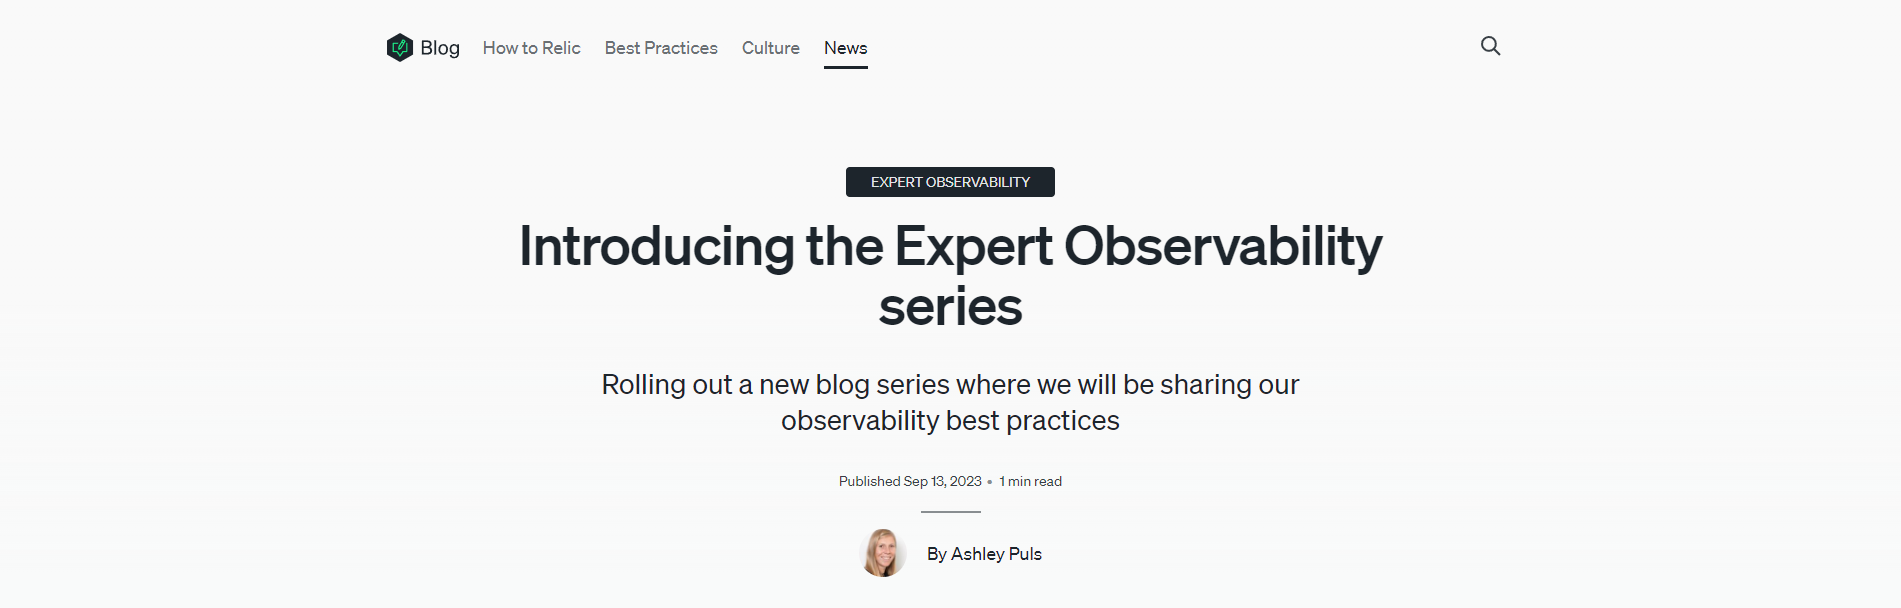 Cover image of New Relic article introducing expert observability series.